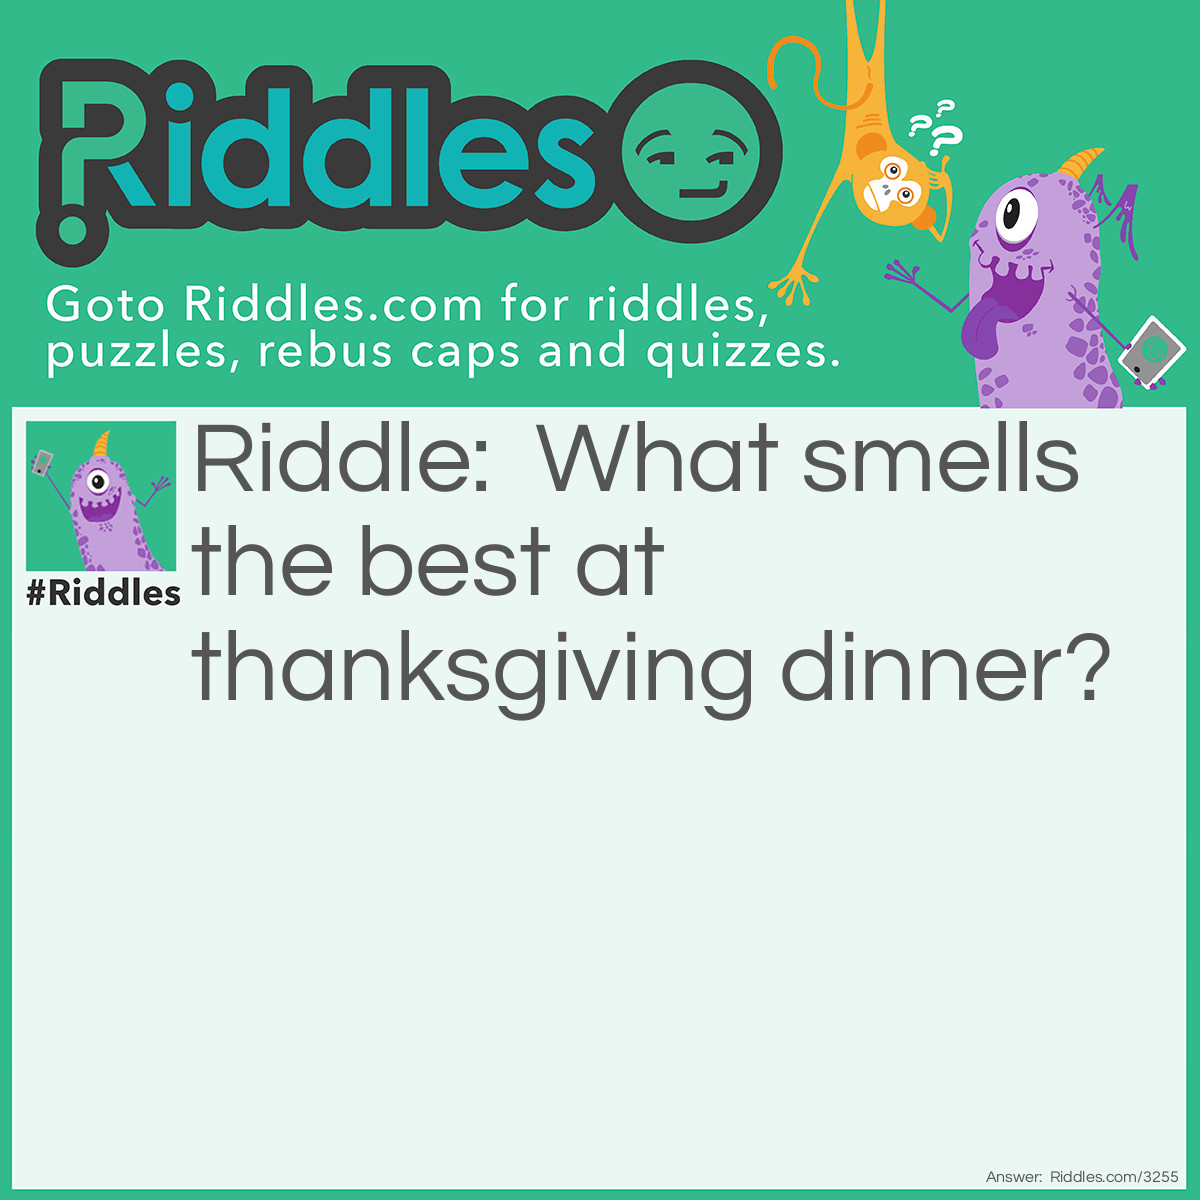 Riddle: What smells the best at <a href="https://www.riddles.com/quiz/thanksgiving-riddles">Thanksgiving dinner</a>? Answer: Your nose.